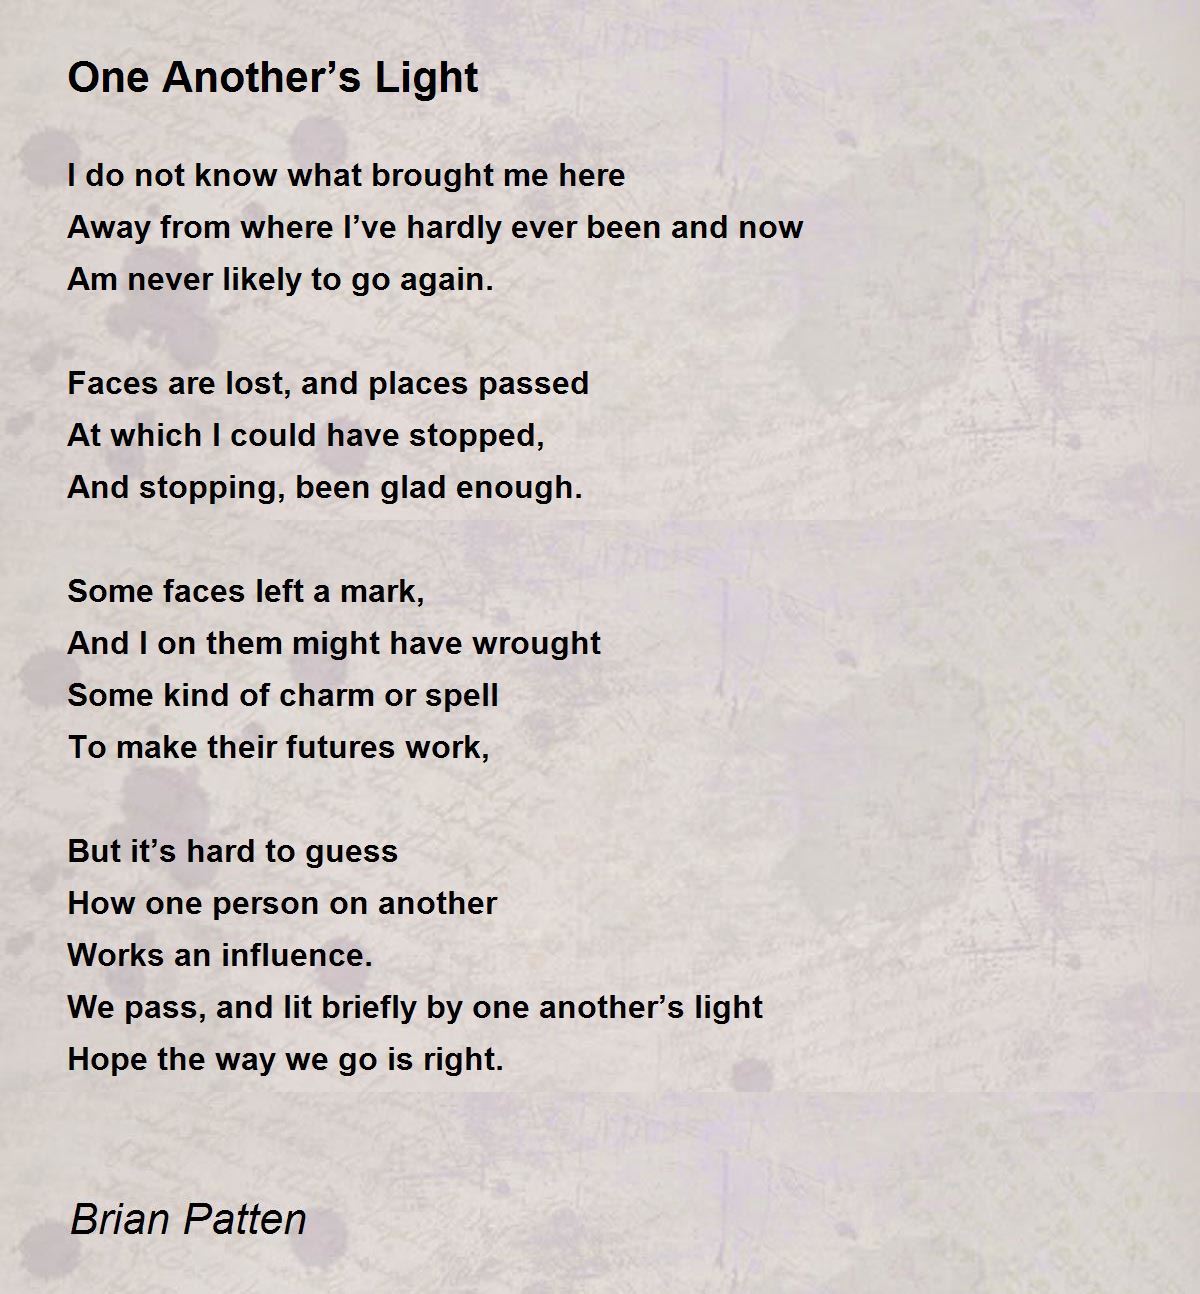 One Another's Light - One Another's Light Poem by Brian Patten